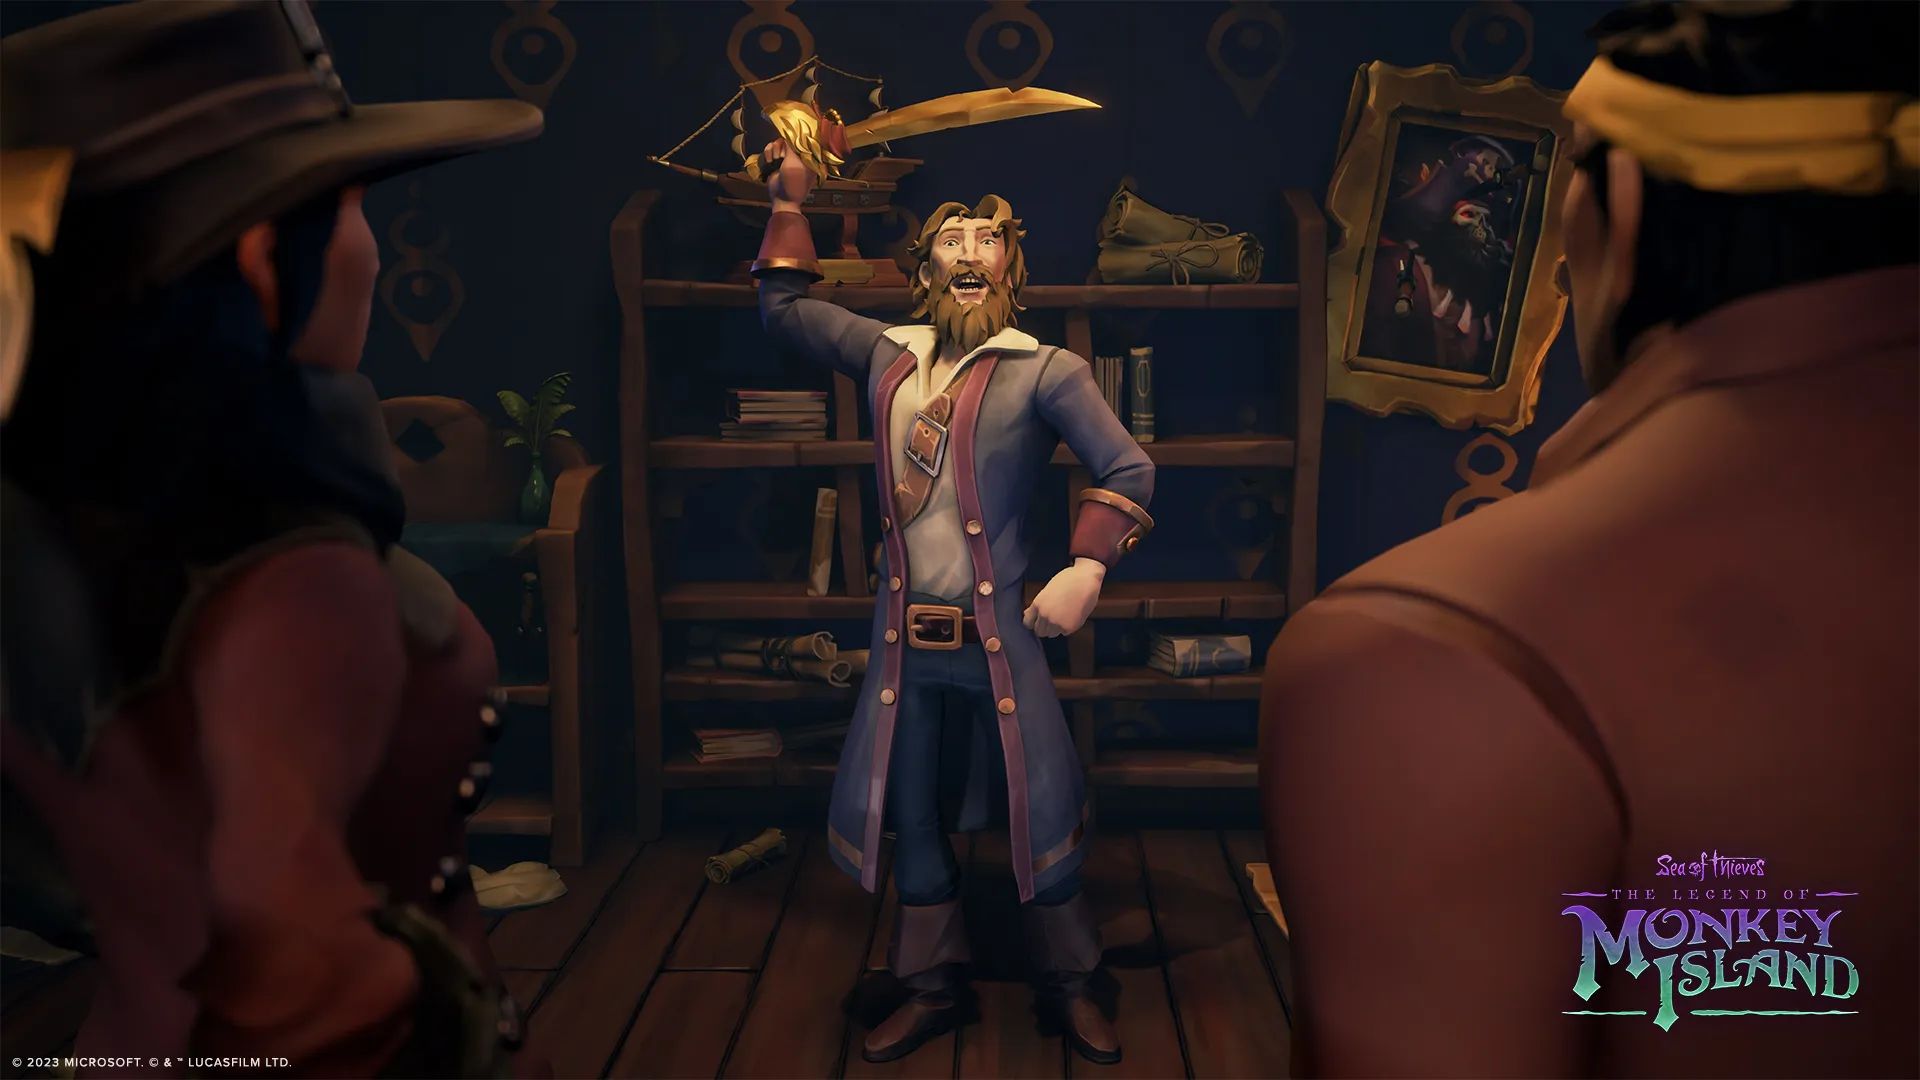 Sea of Thieves Announces Crossover With Monkey Island With 3 New Tall Tales